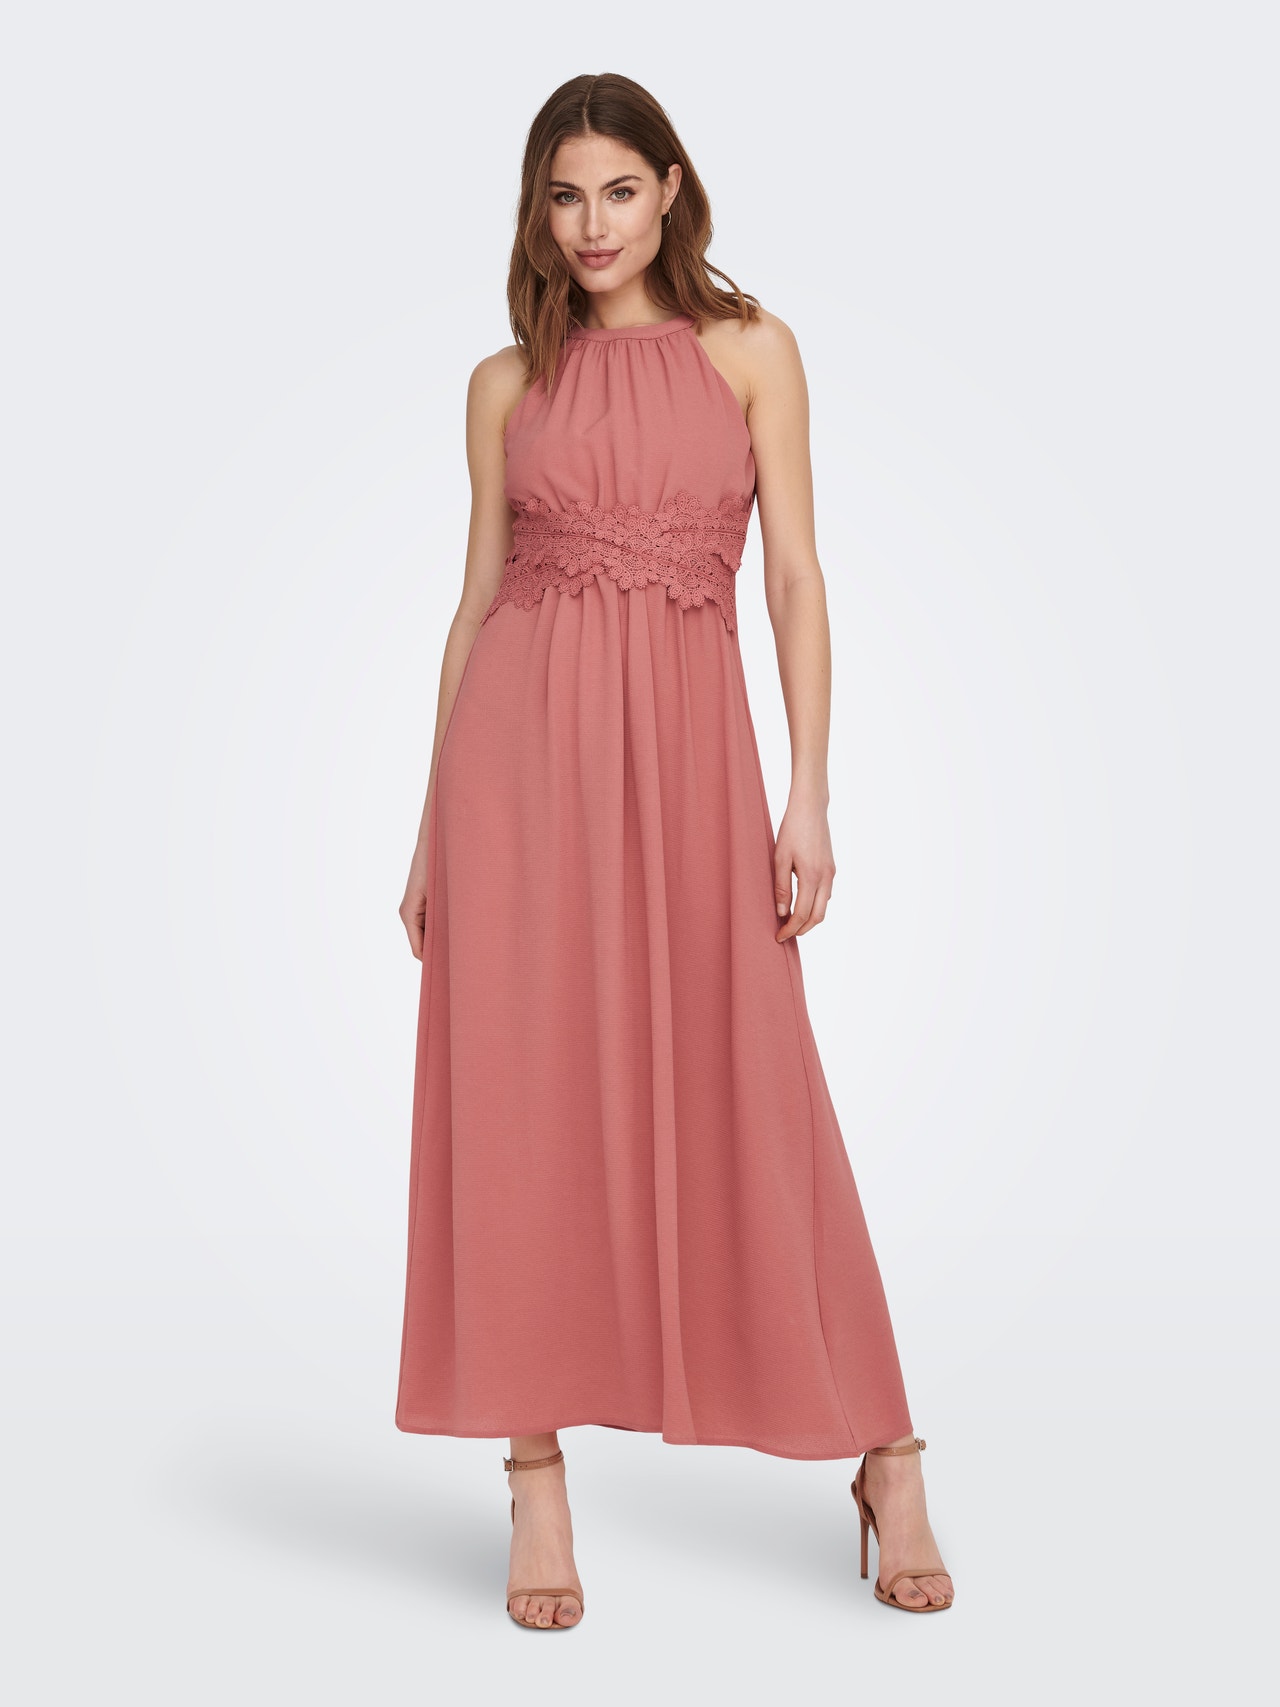 ONLY Robe midi Relaxed Fit Dos nu -Dusty Cedar - 15304689